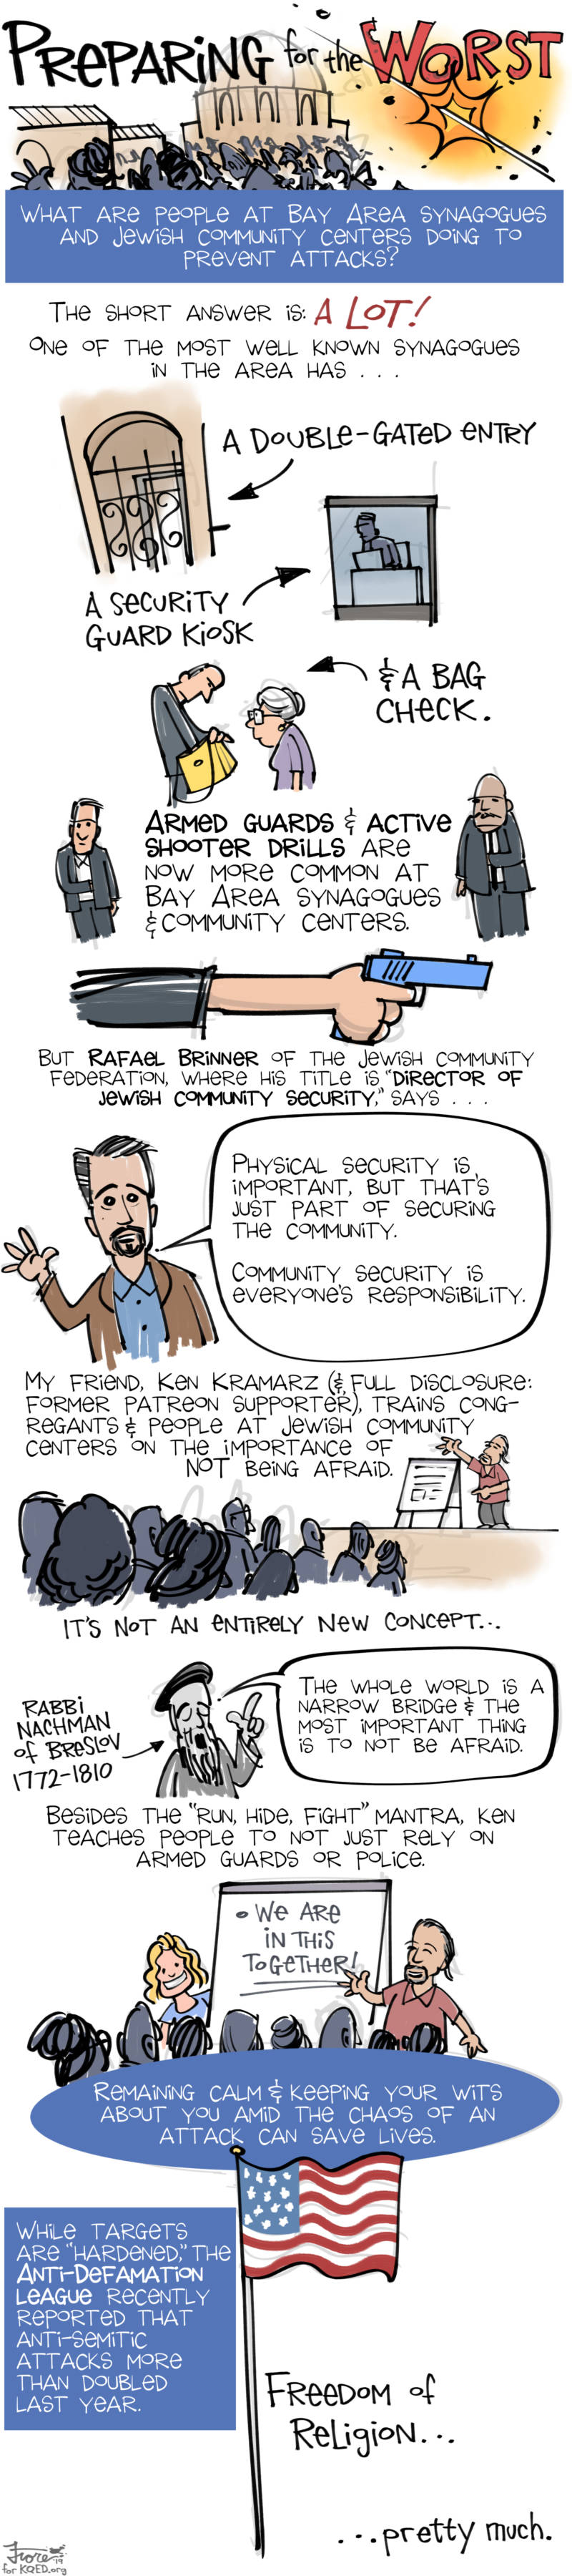 Preparing for the Worst: A Cartoon Look at Securing Bay Area Synagogues by Mark Fiore